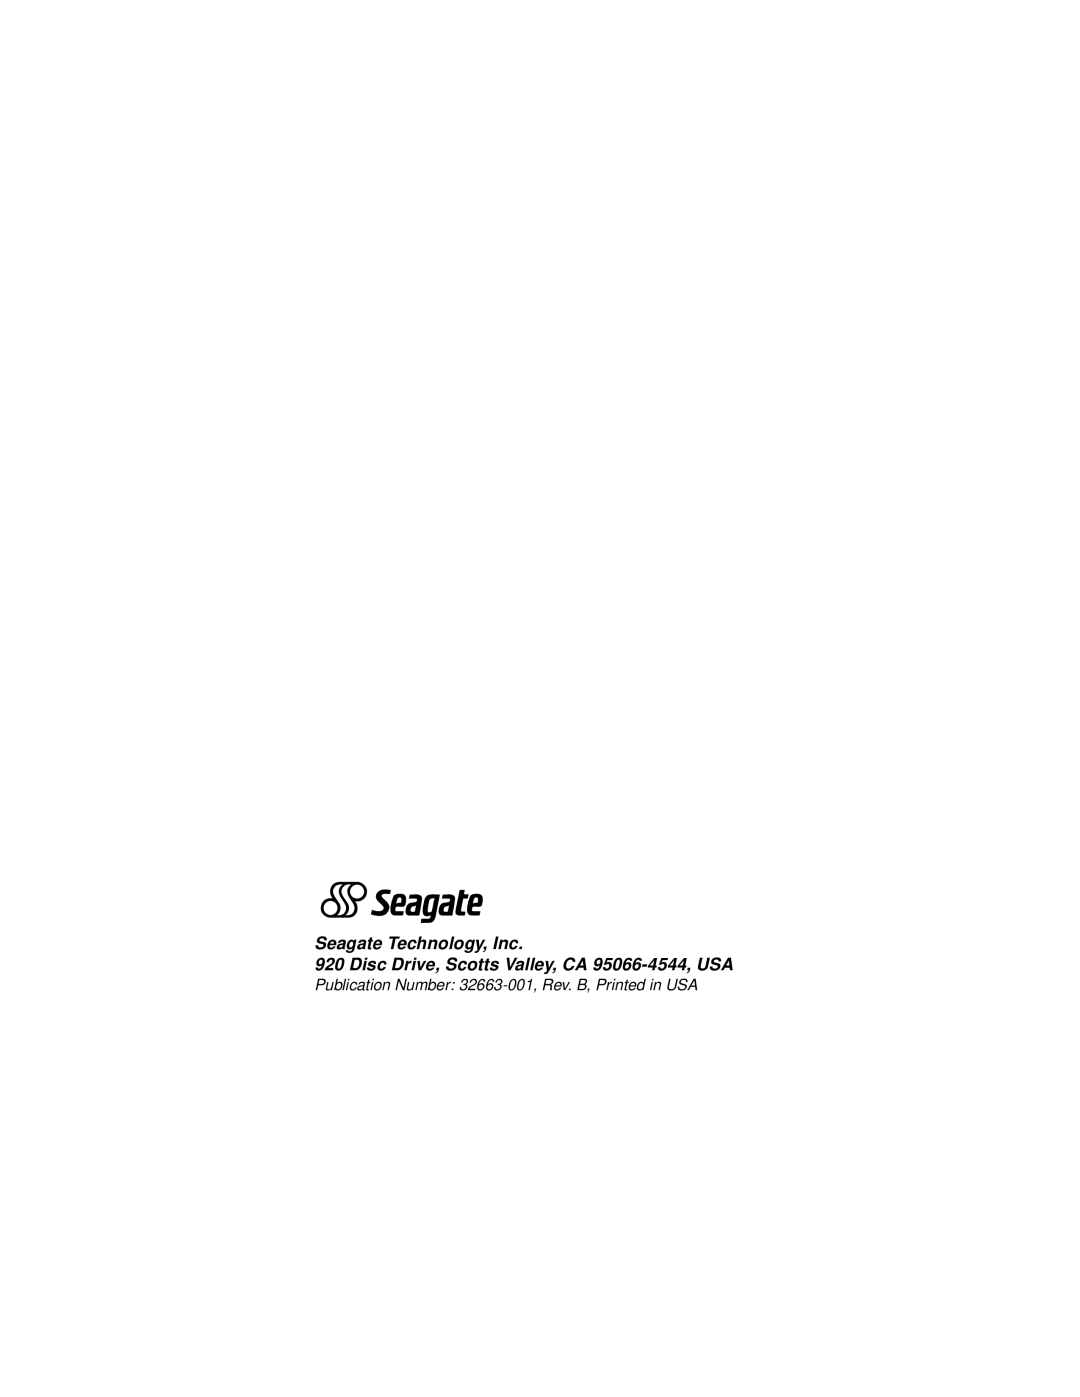 Seagate ST39140N/W/WC/LW/LC, ST36530N/W/WC manual Seagate Technology, Inc, Disc Drive, Scotts Valley, CA 95066-4544,USA 